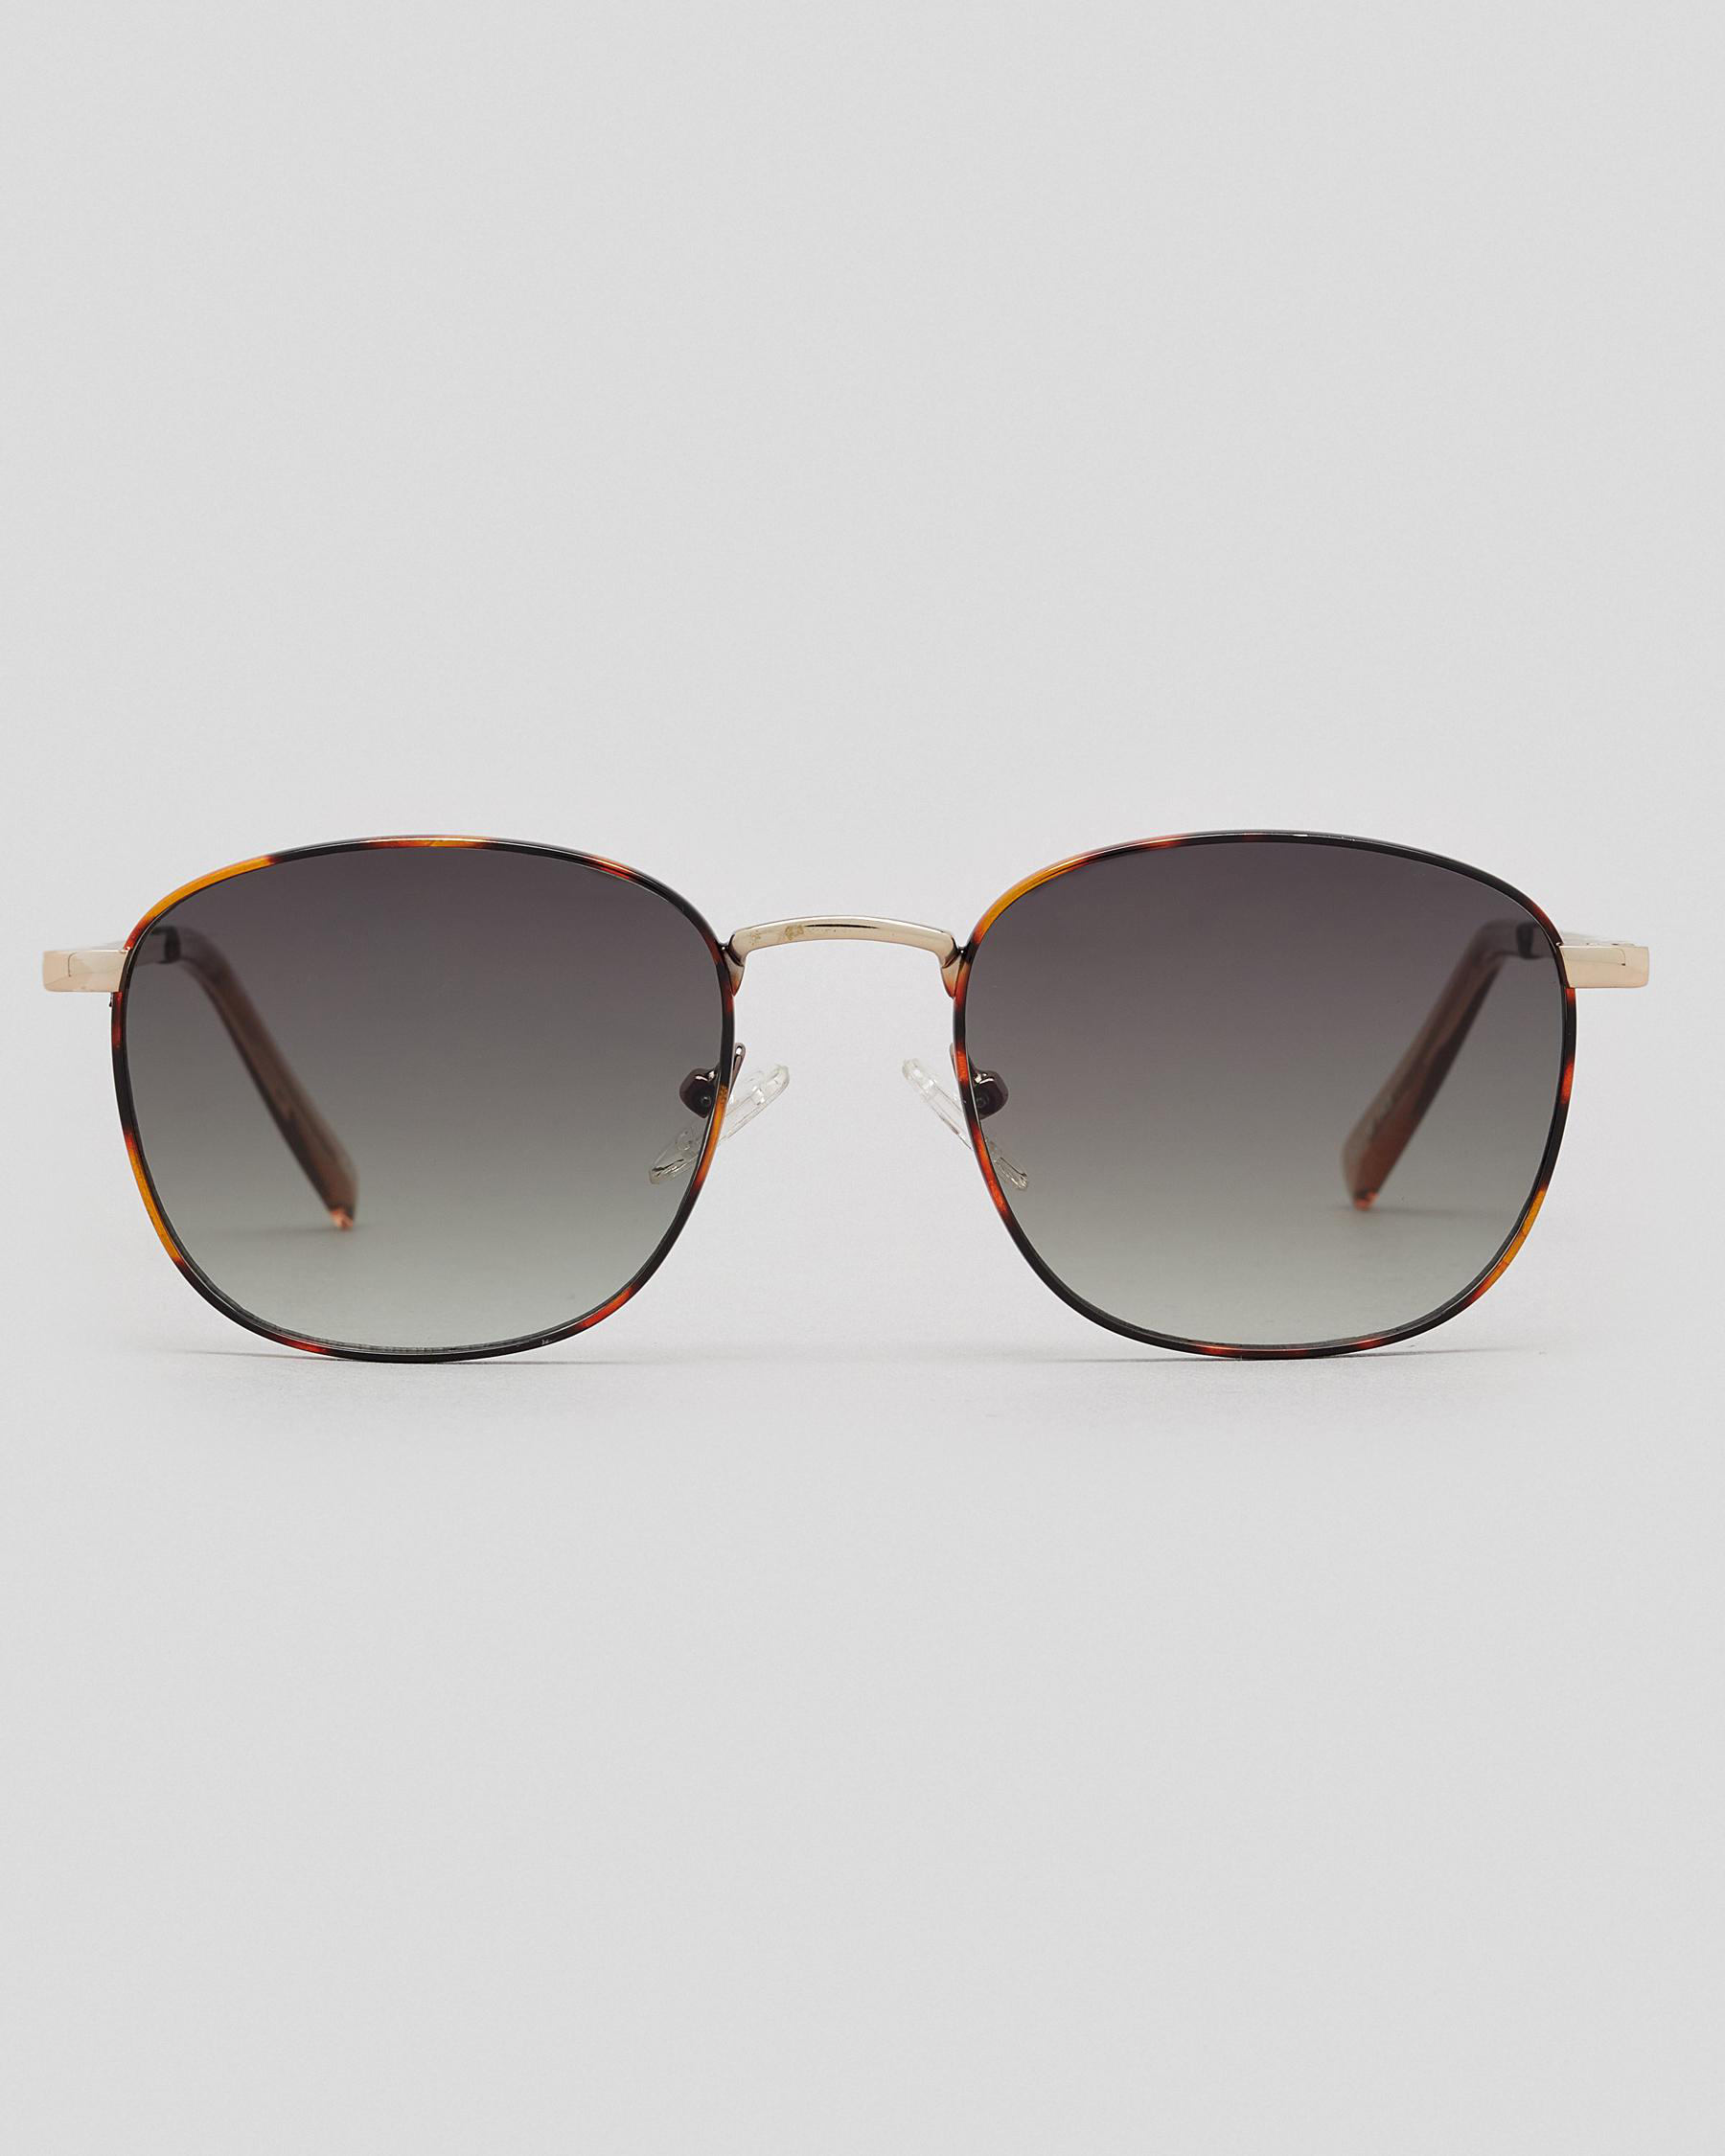 Le Specs Neptune Deux Sunglasses In Bright Gold Tort Fast Shipping And Easy Returns City 9452